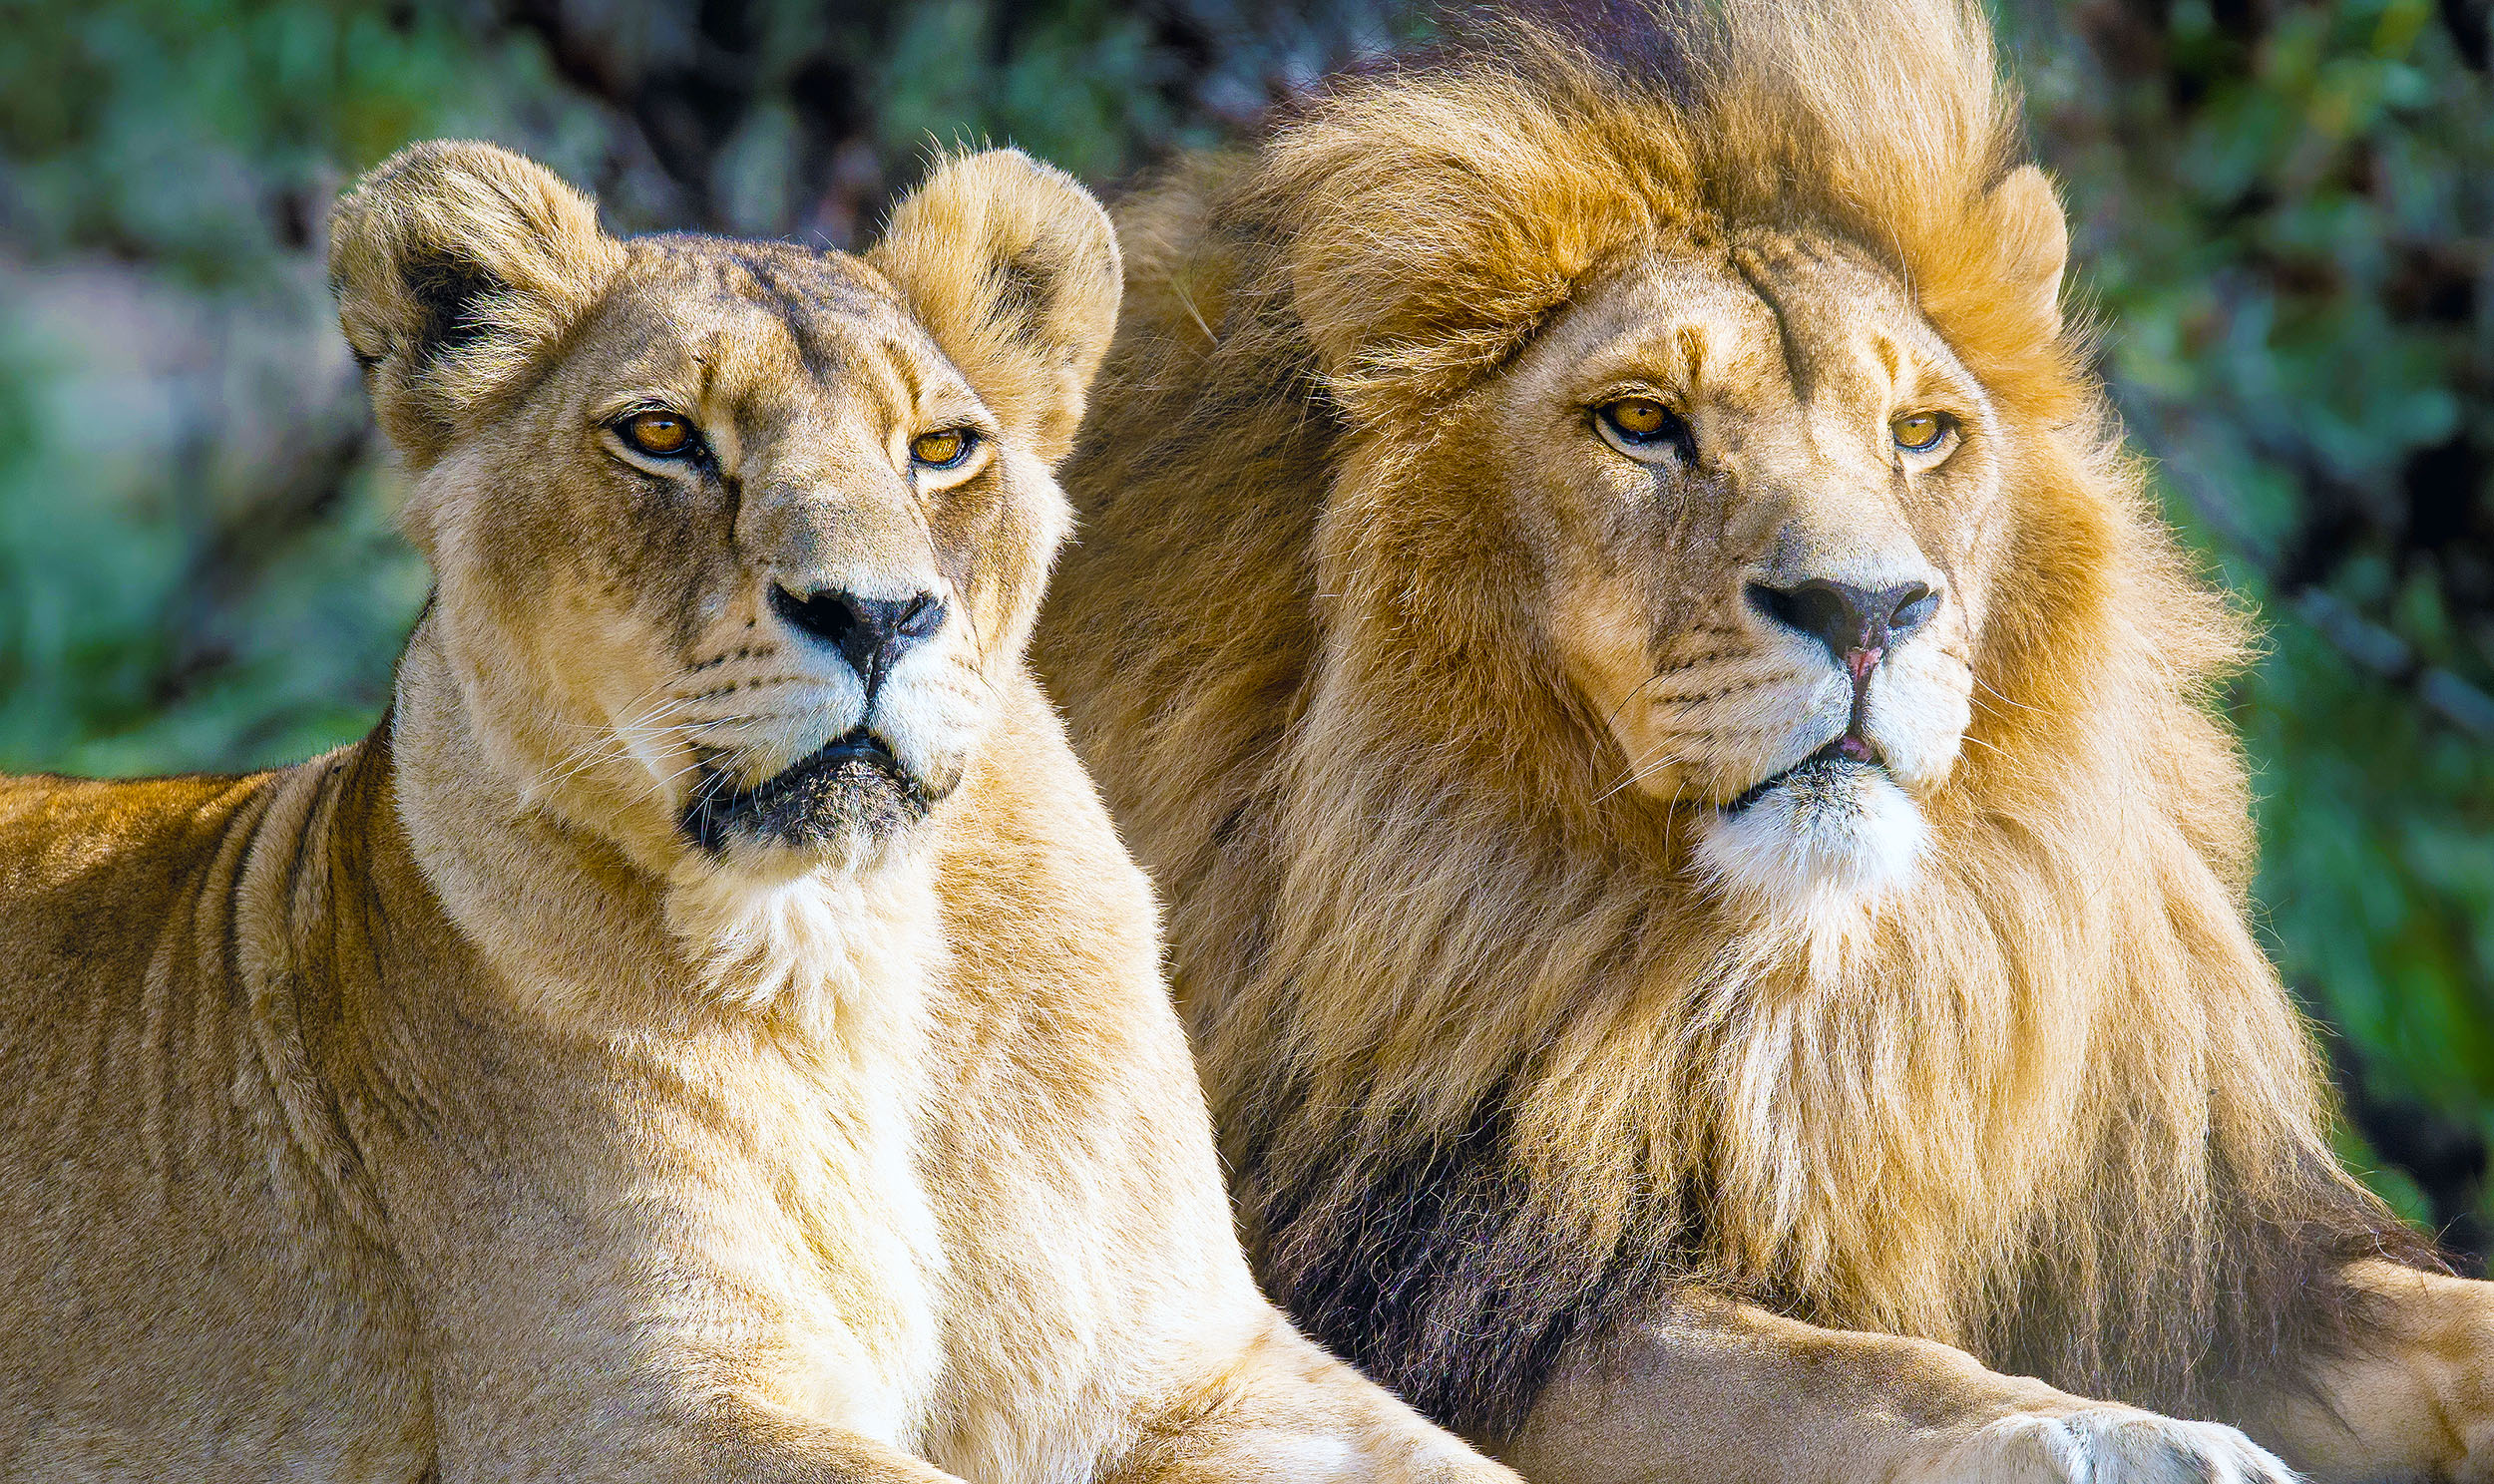 Lions are hanging on the brink of extinction, urgent action must be taken